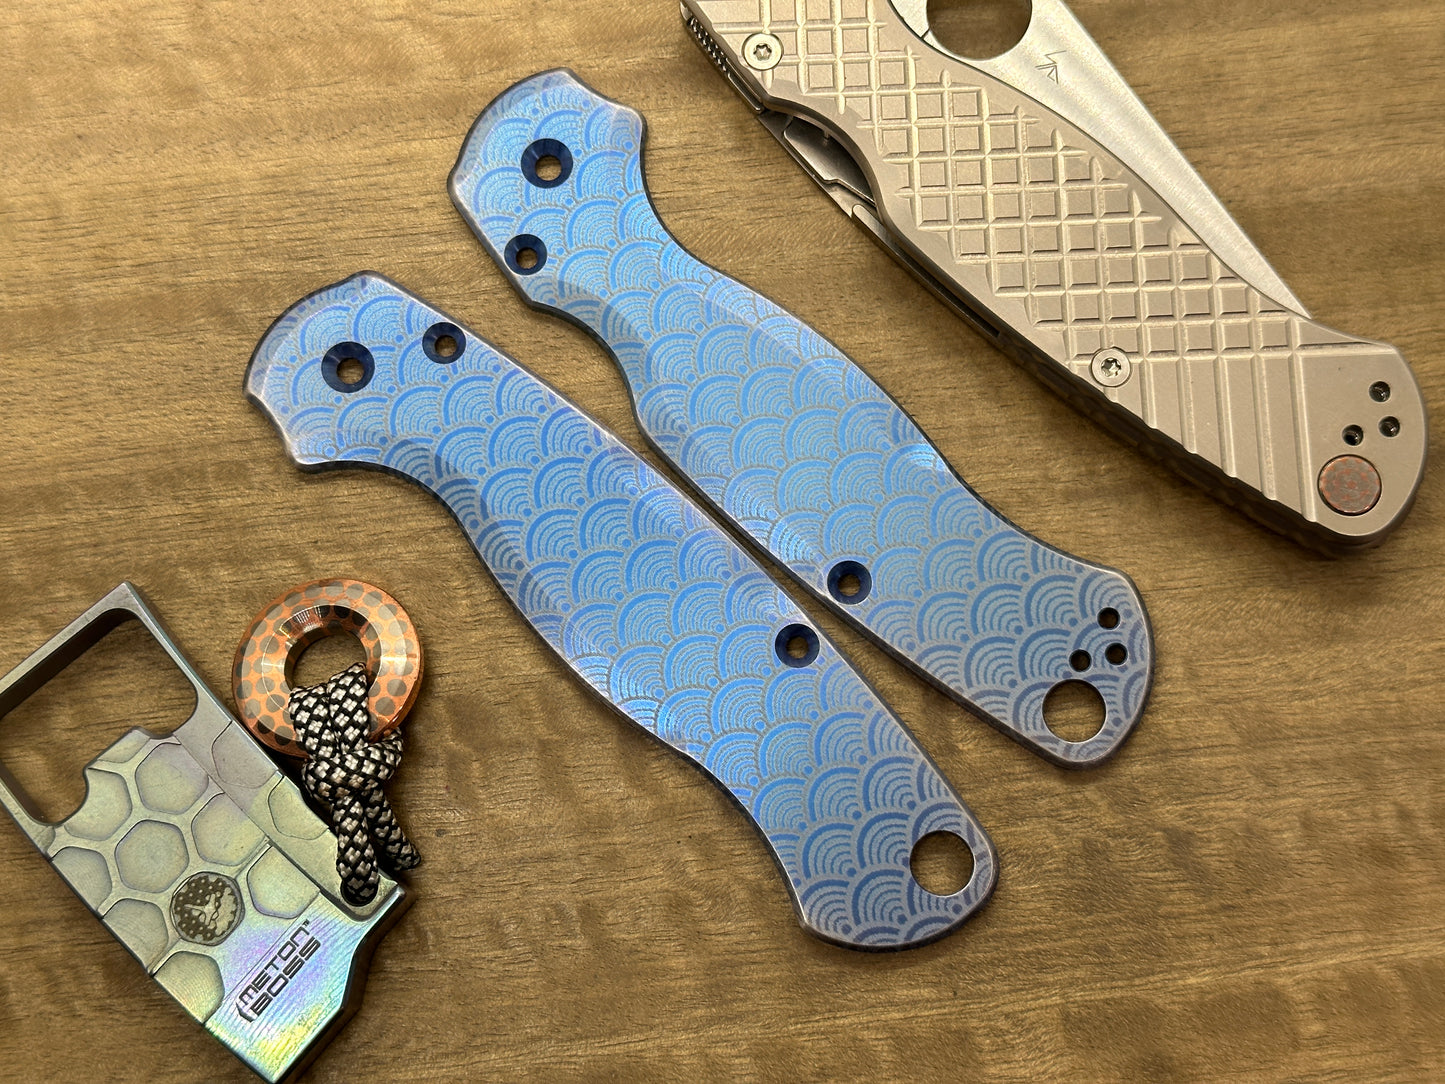 SEIGAIHA Blue Ano Brushed Titanium scales for Spyderco Paramilitary 2 PM2